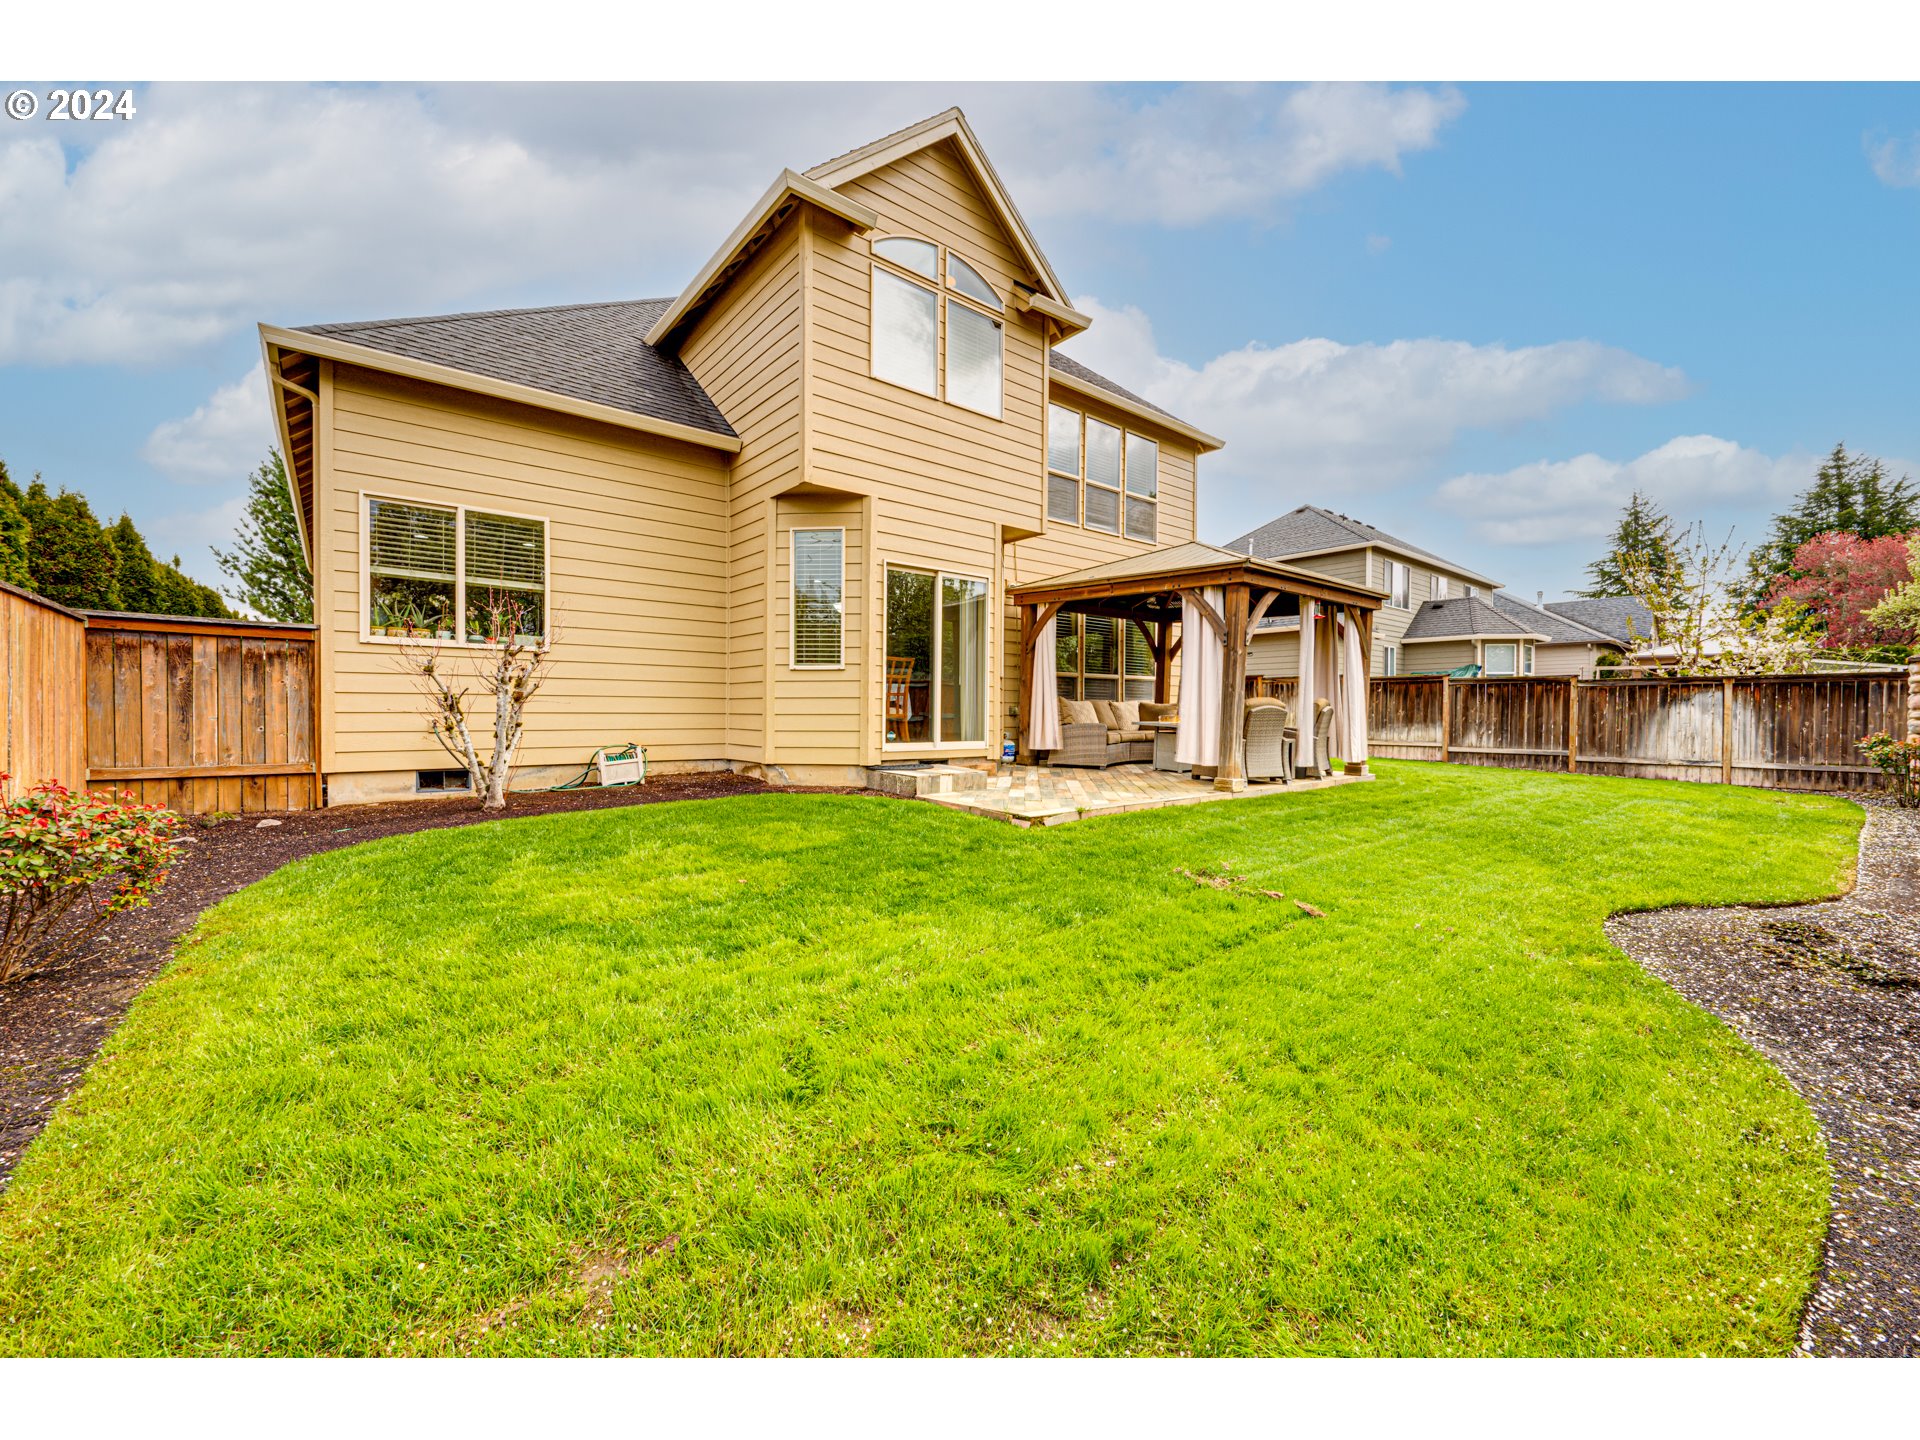 807 NW 150th St, Vancouver, WA 98685